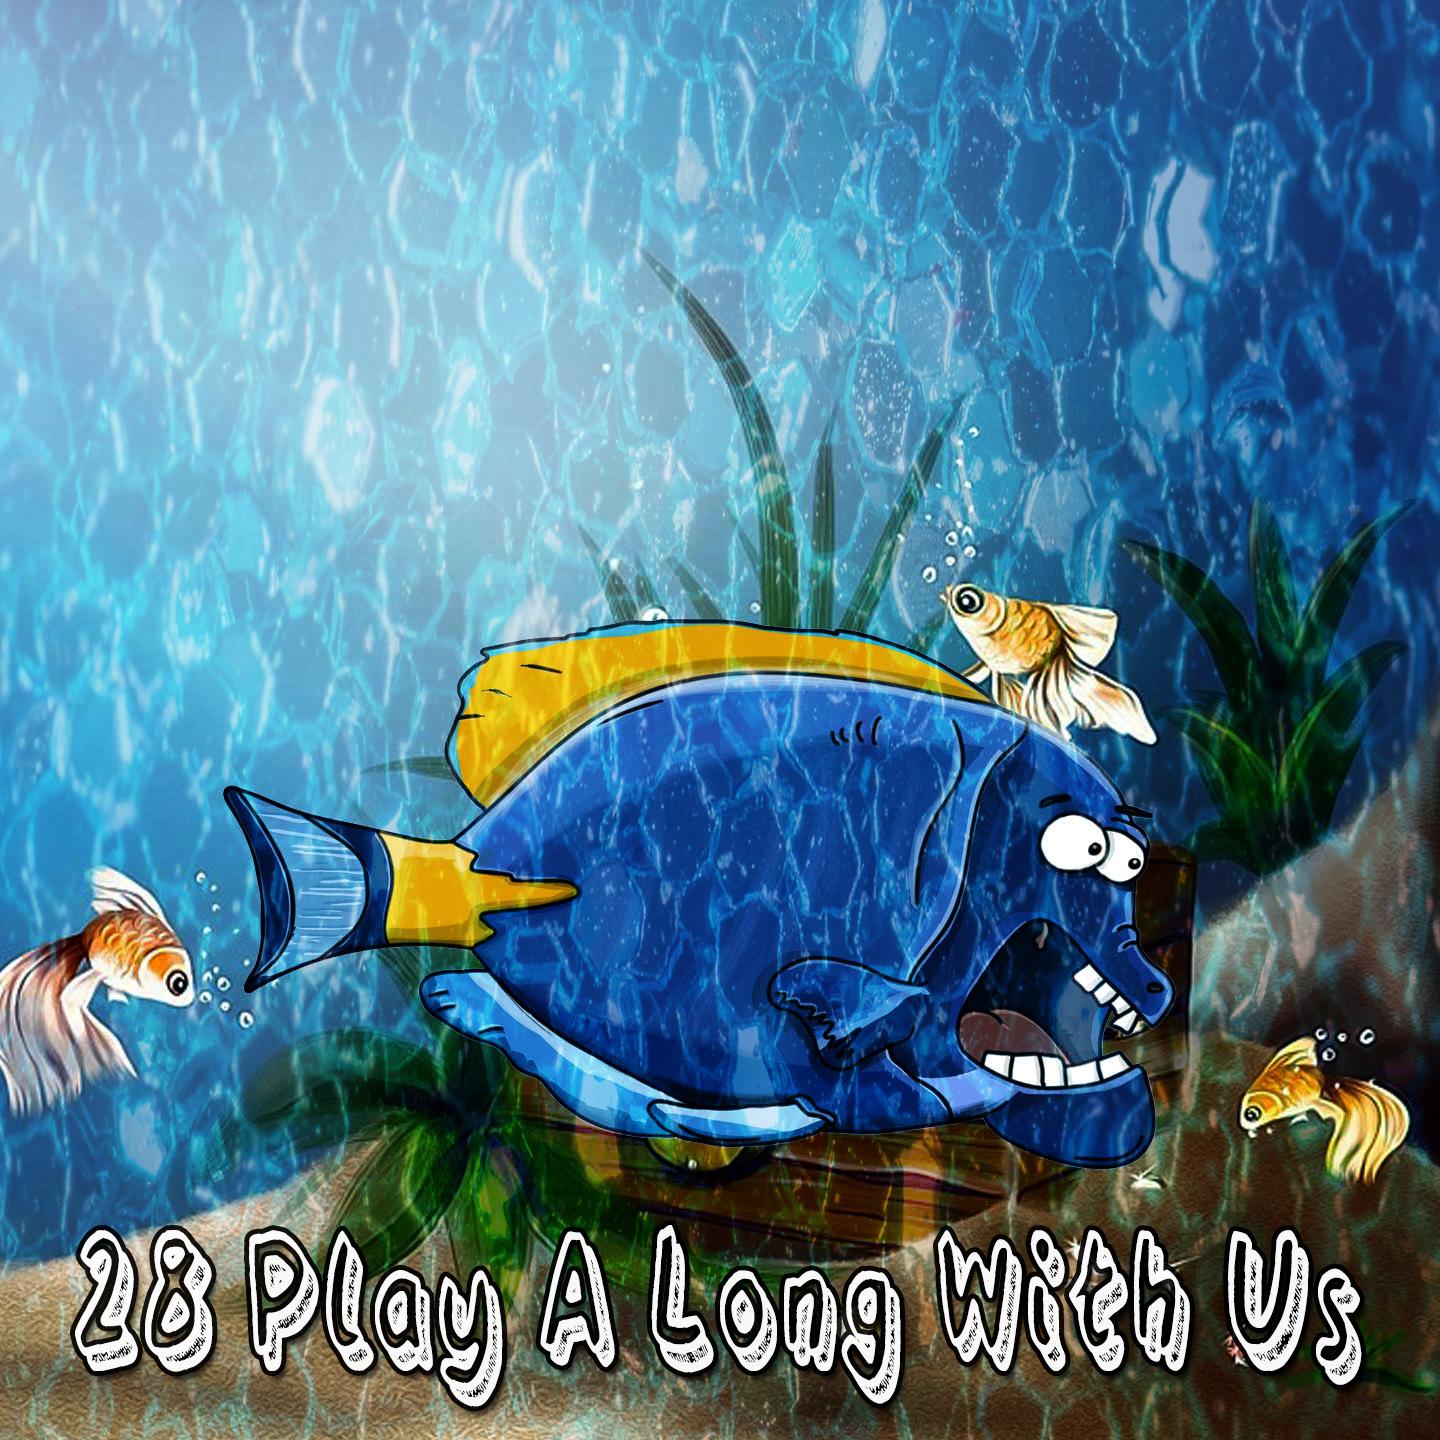 28 Play a Long with Us